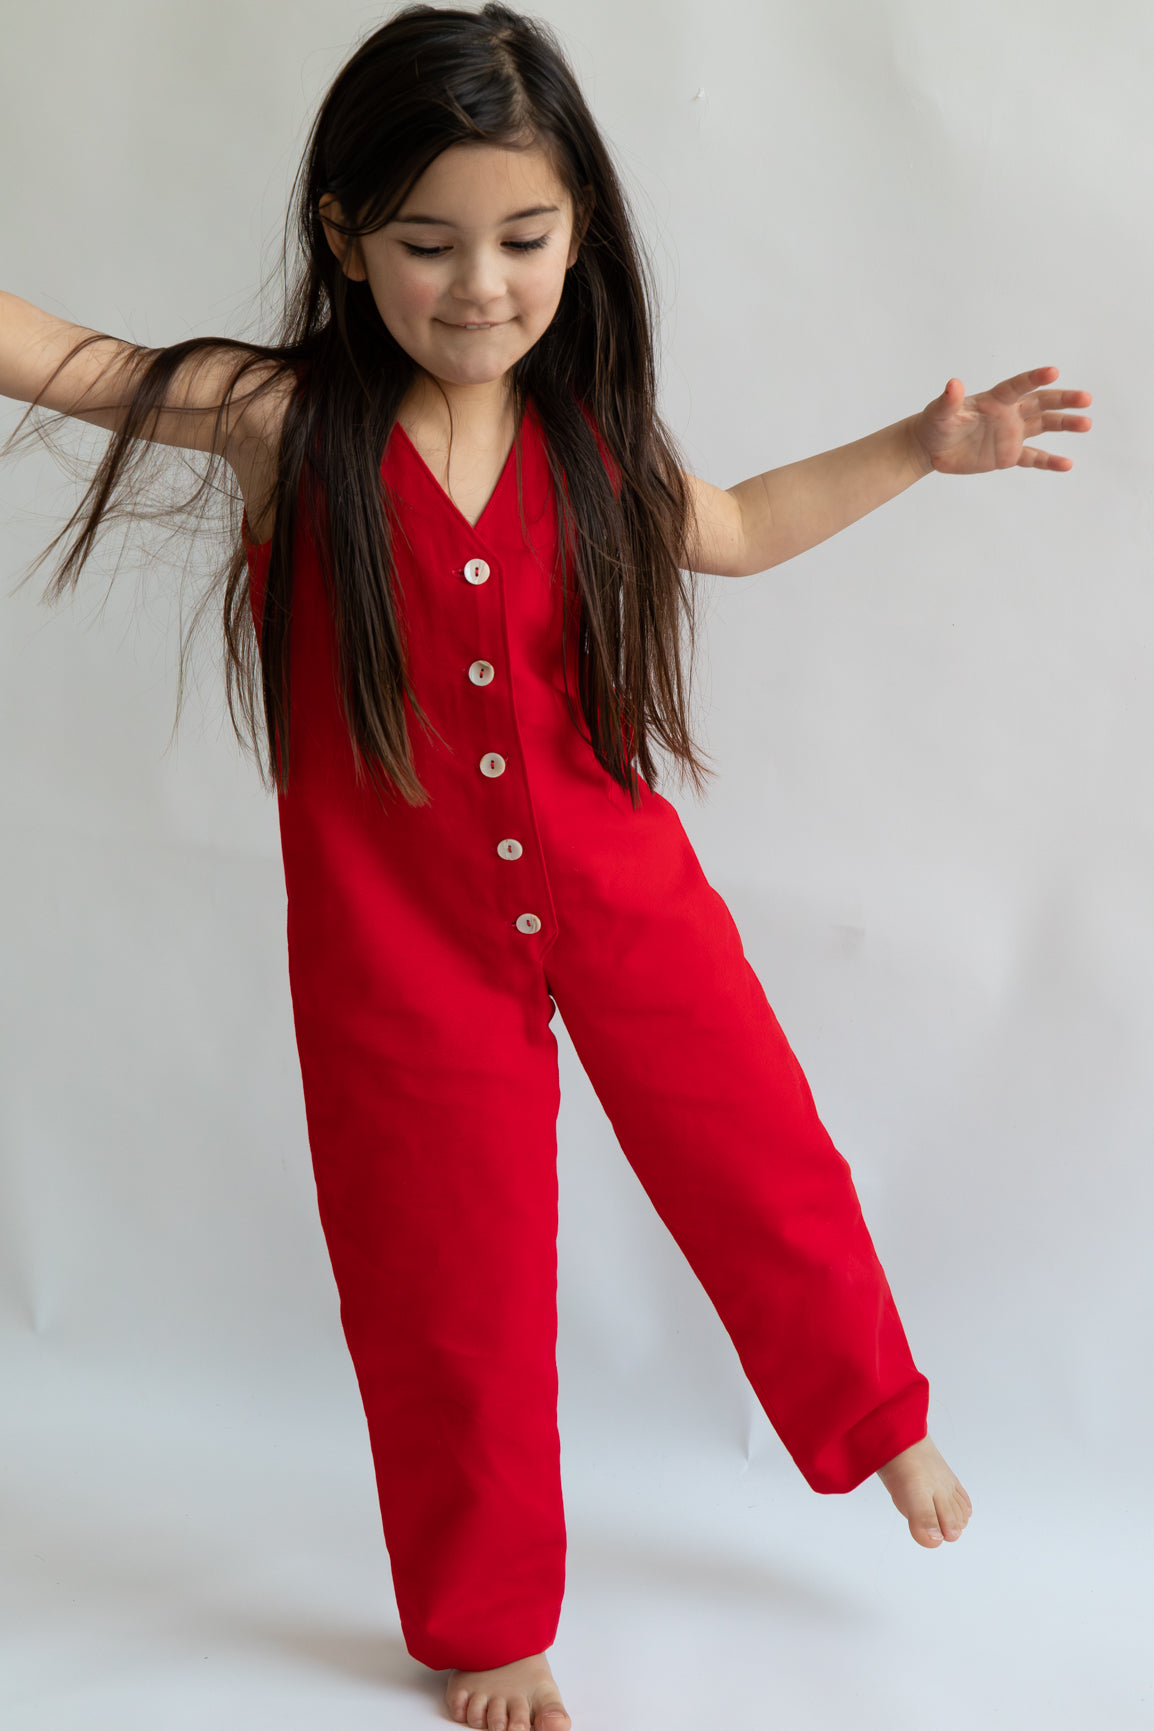 red color Kids Mini Jumpsuit overall workwear cotton canvas 5 buttons v-neck OEKO-TEX sustainable clothes handmade